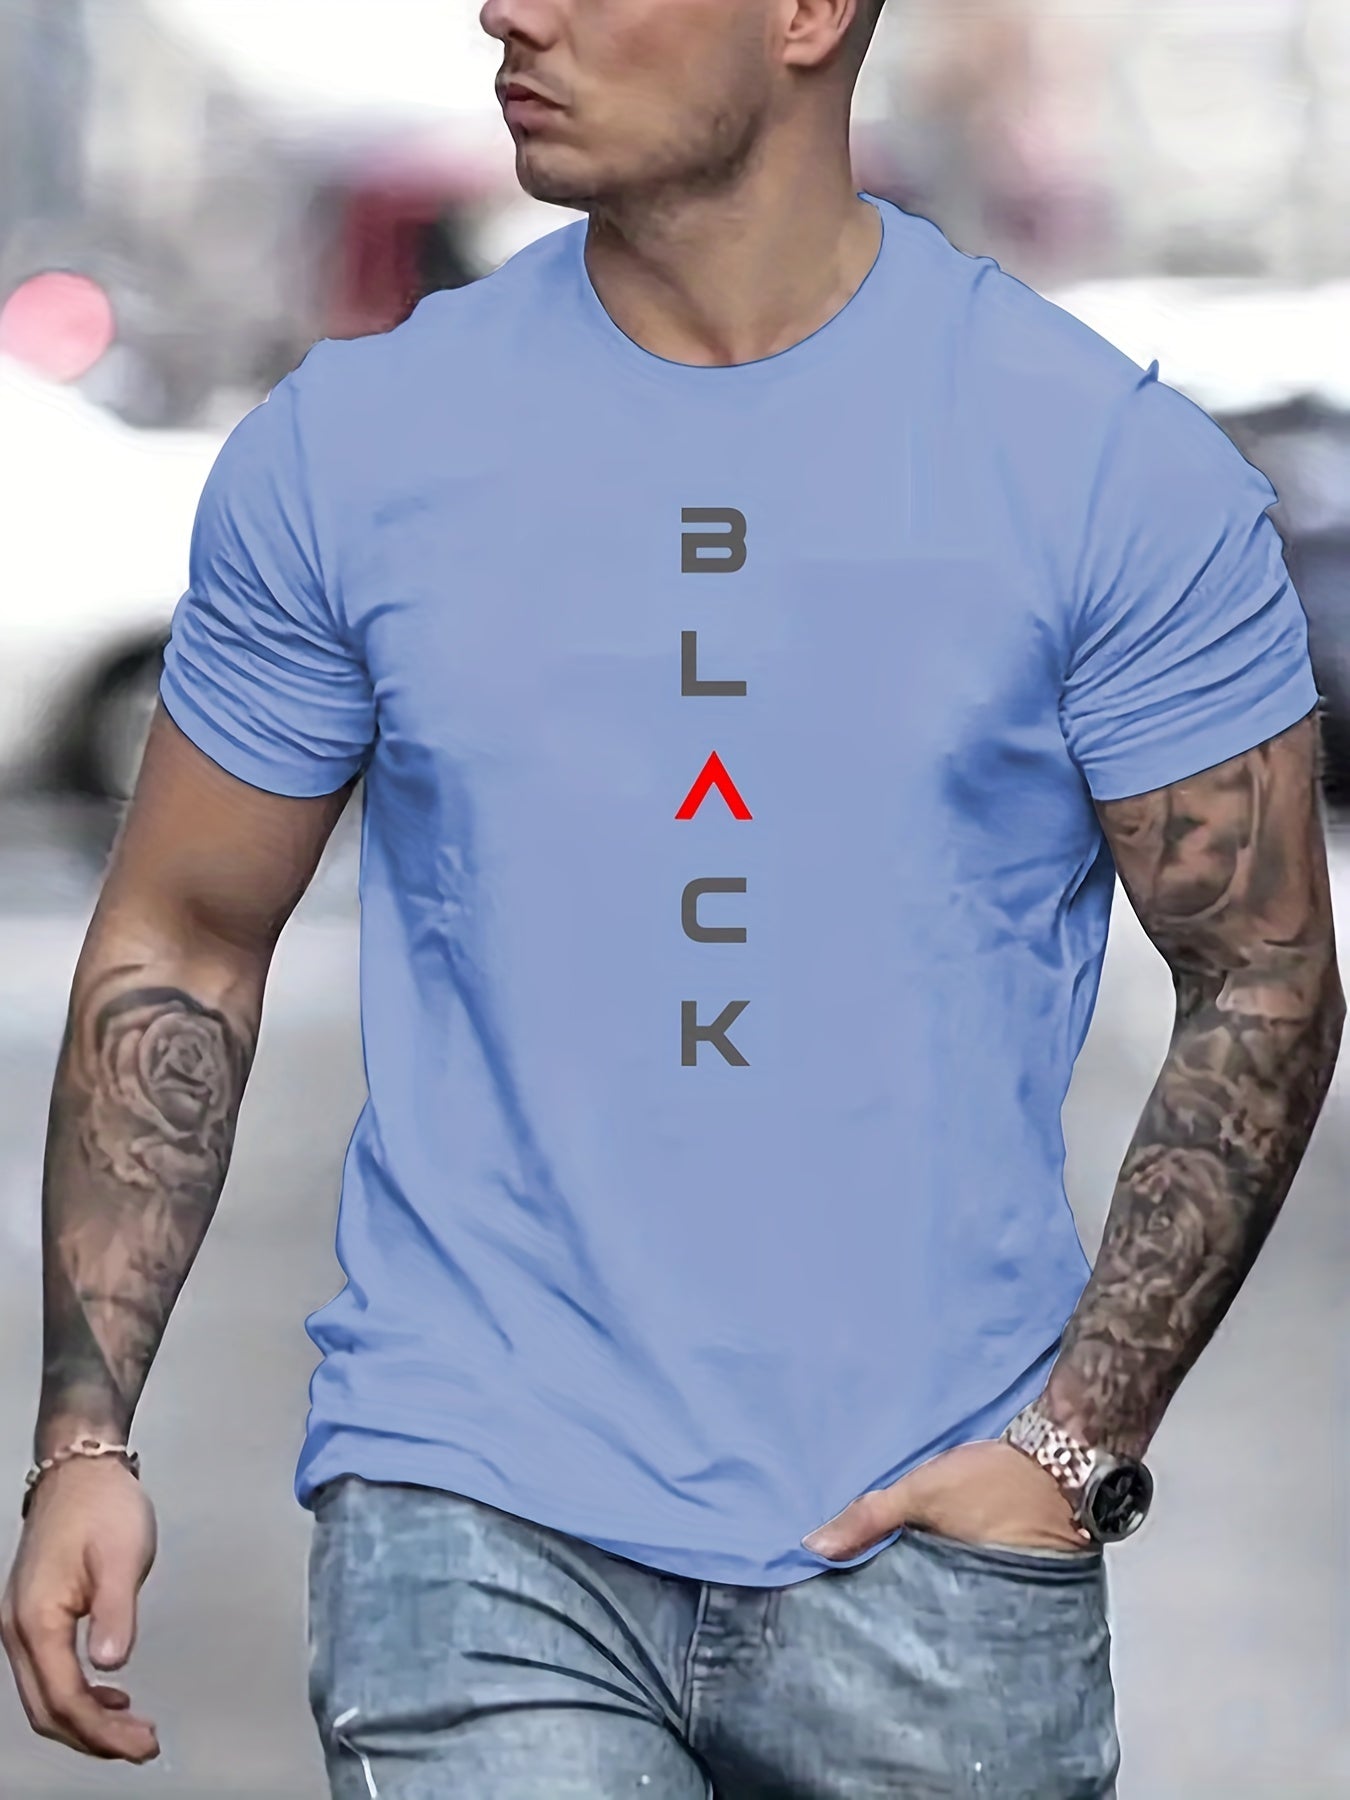 'Black' Print Tee Shirt, Tee For Men, Casual Short Sleeve T-shirt For Summer Spring Fall, Tops As Gifts